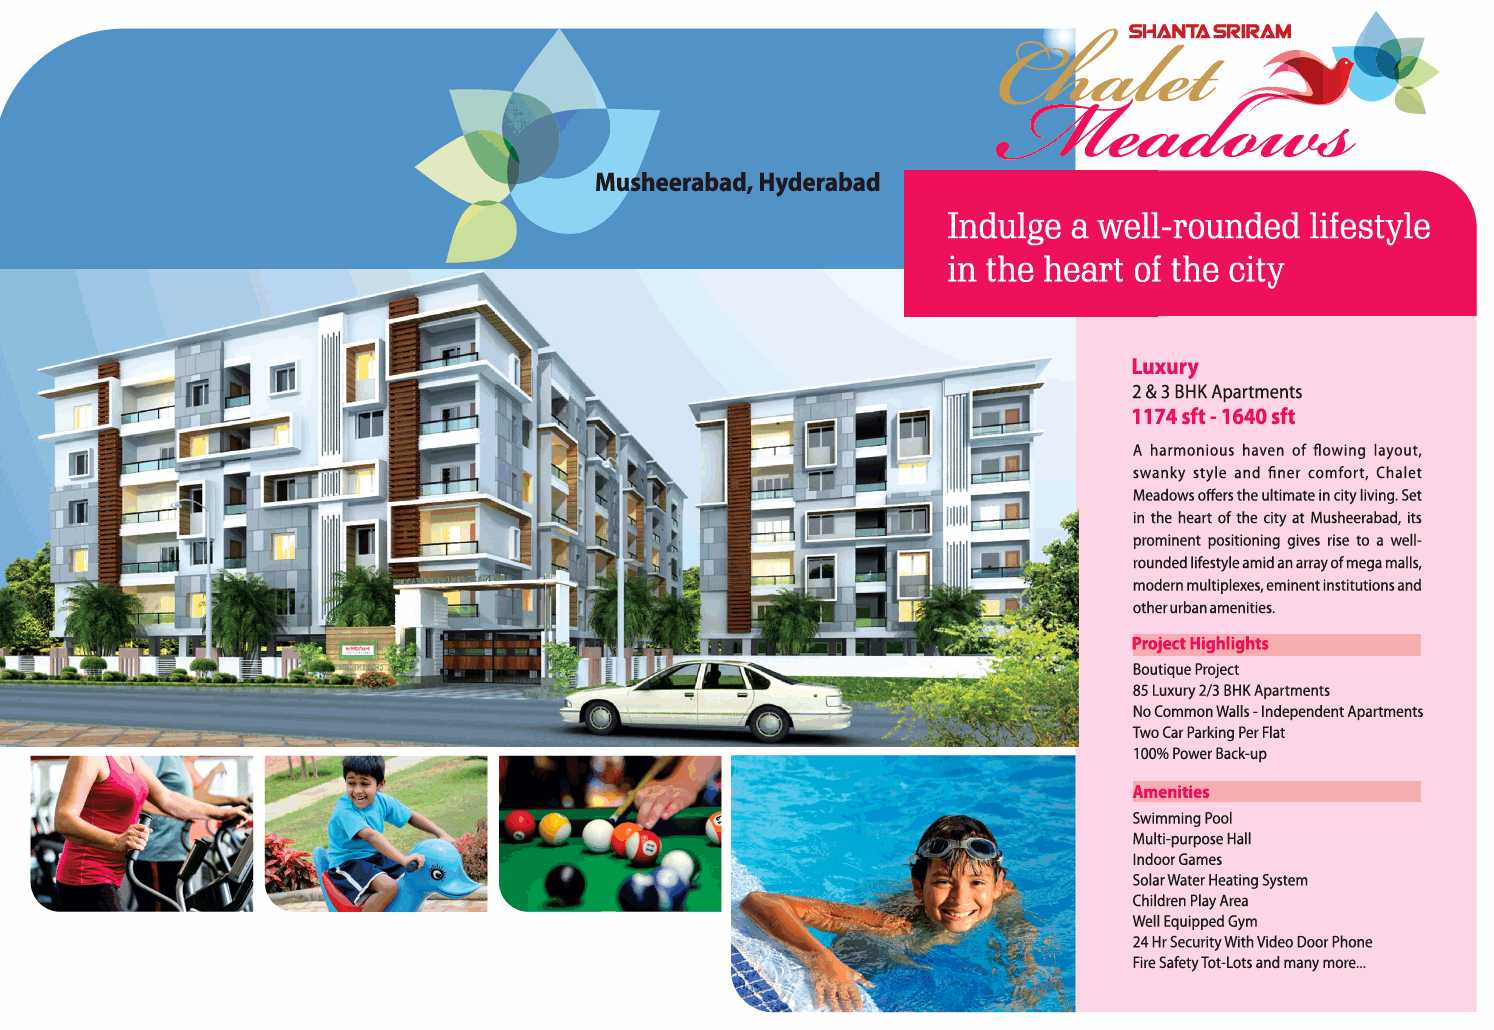 Indulge a well-rounded lifestyle in the heart of the city at Shanta Sriram Chalet Meadows in Hyderabad